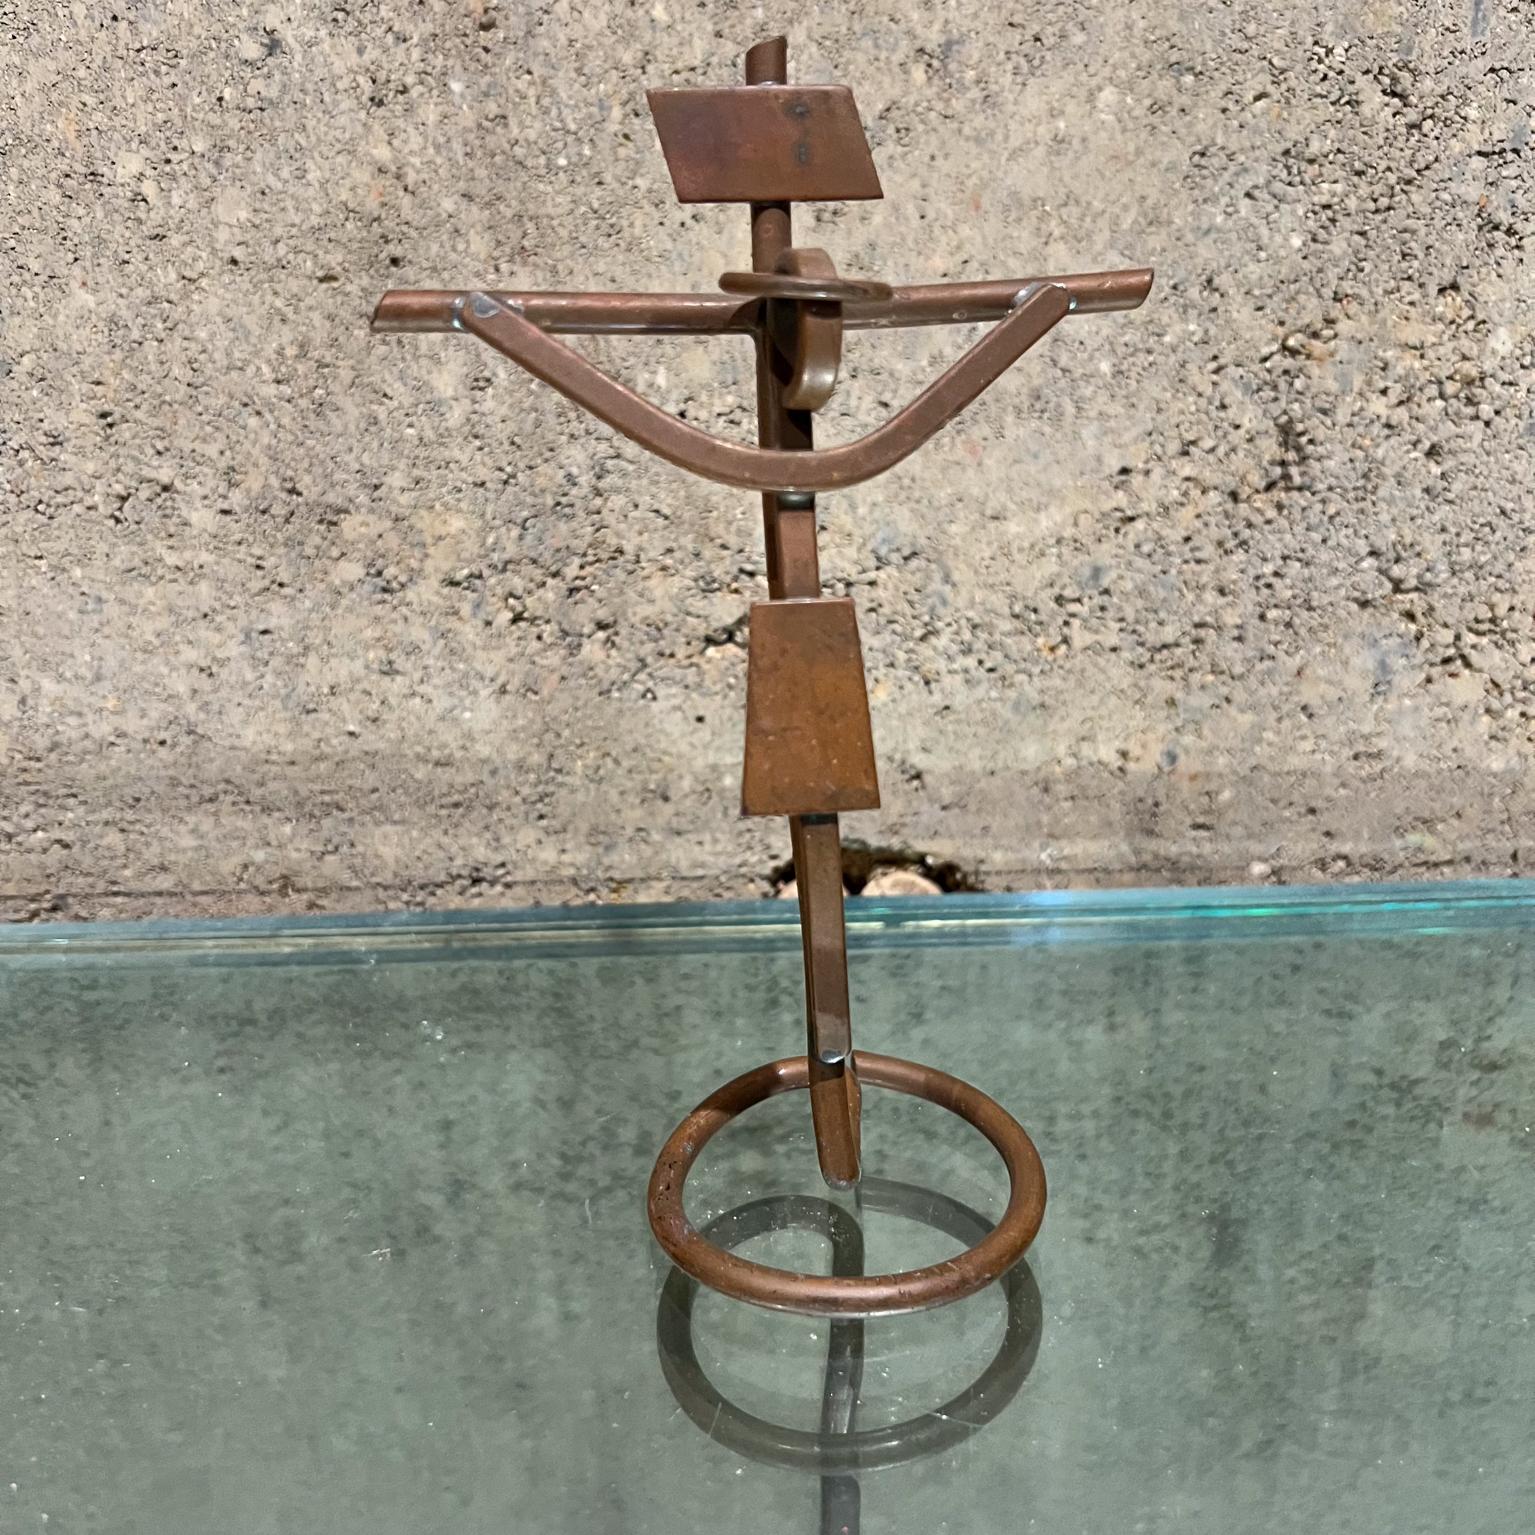 
1980s Mathias Goeritz Sculptural Cross Copper
stamped Mathias Goeritz. No COA is available.
6.25 H x 4 W x 2.5 D
Original vintage preowned unrestored condition.
Refer to all images.

 